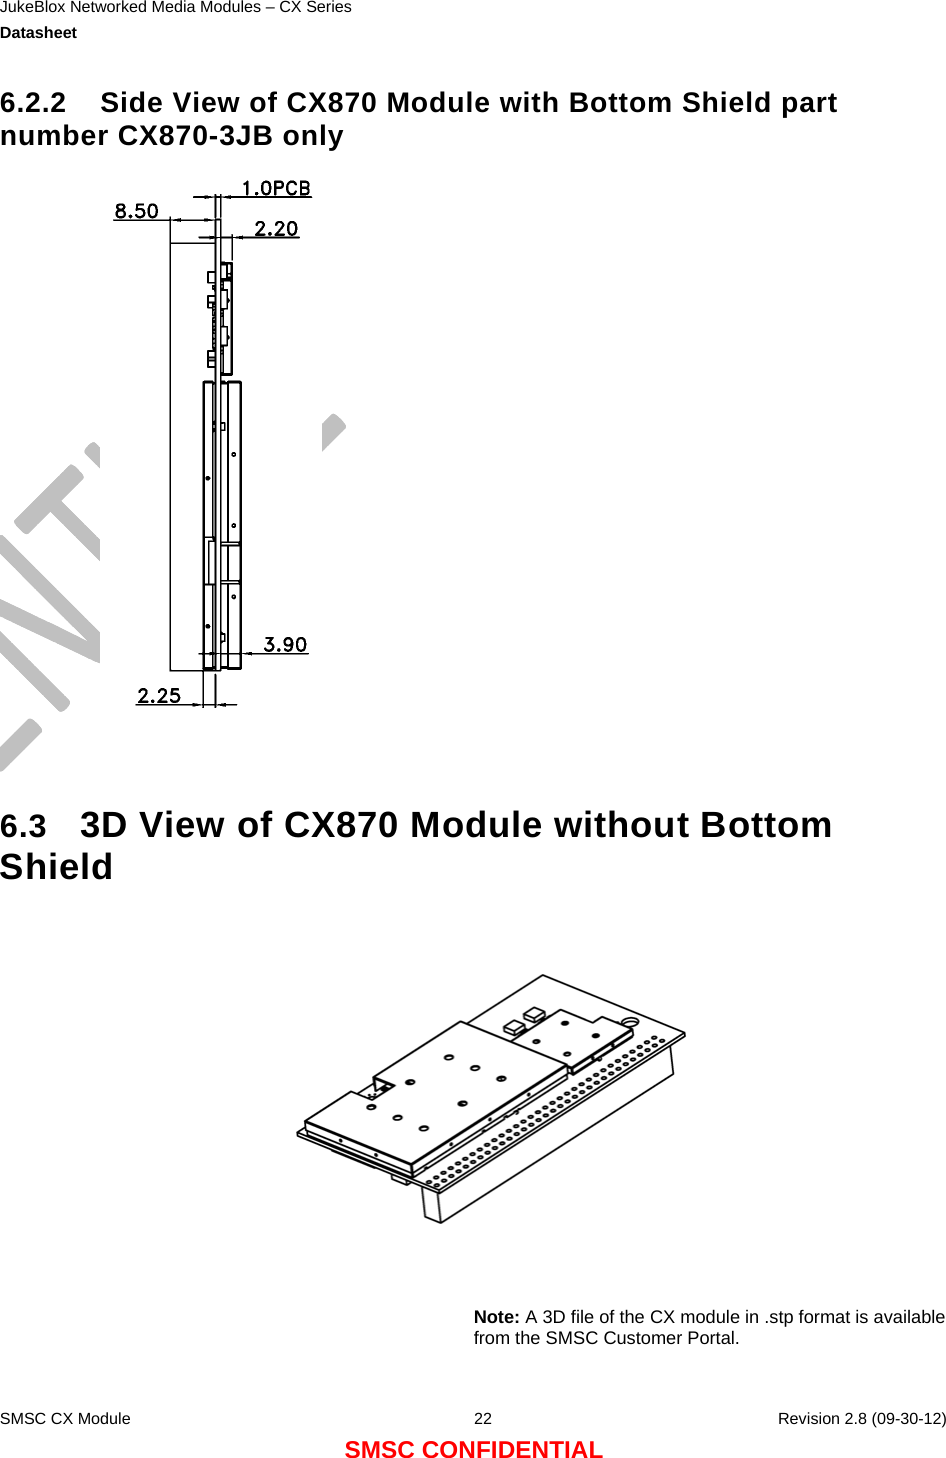 JukeBlox Networked Media Modules – CX Series  Datasheet    SMSC CX Module  22    Revision 2.8 (09-30-12) SMSC CONFIDENTIAL 6.2.2  Side View of CX870 Module with Bottom Shield part number CX870-3JB only    6.3  3D View of CX870 Module without Bottom Shield      Note: A 3D file of the CX module in .stp format is available from the SMSC Customer Portal.  